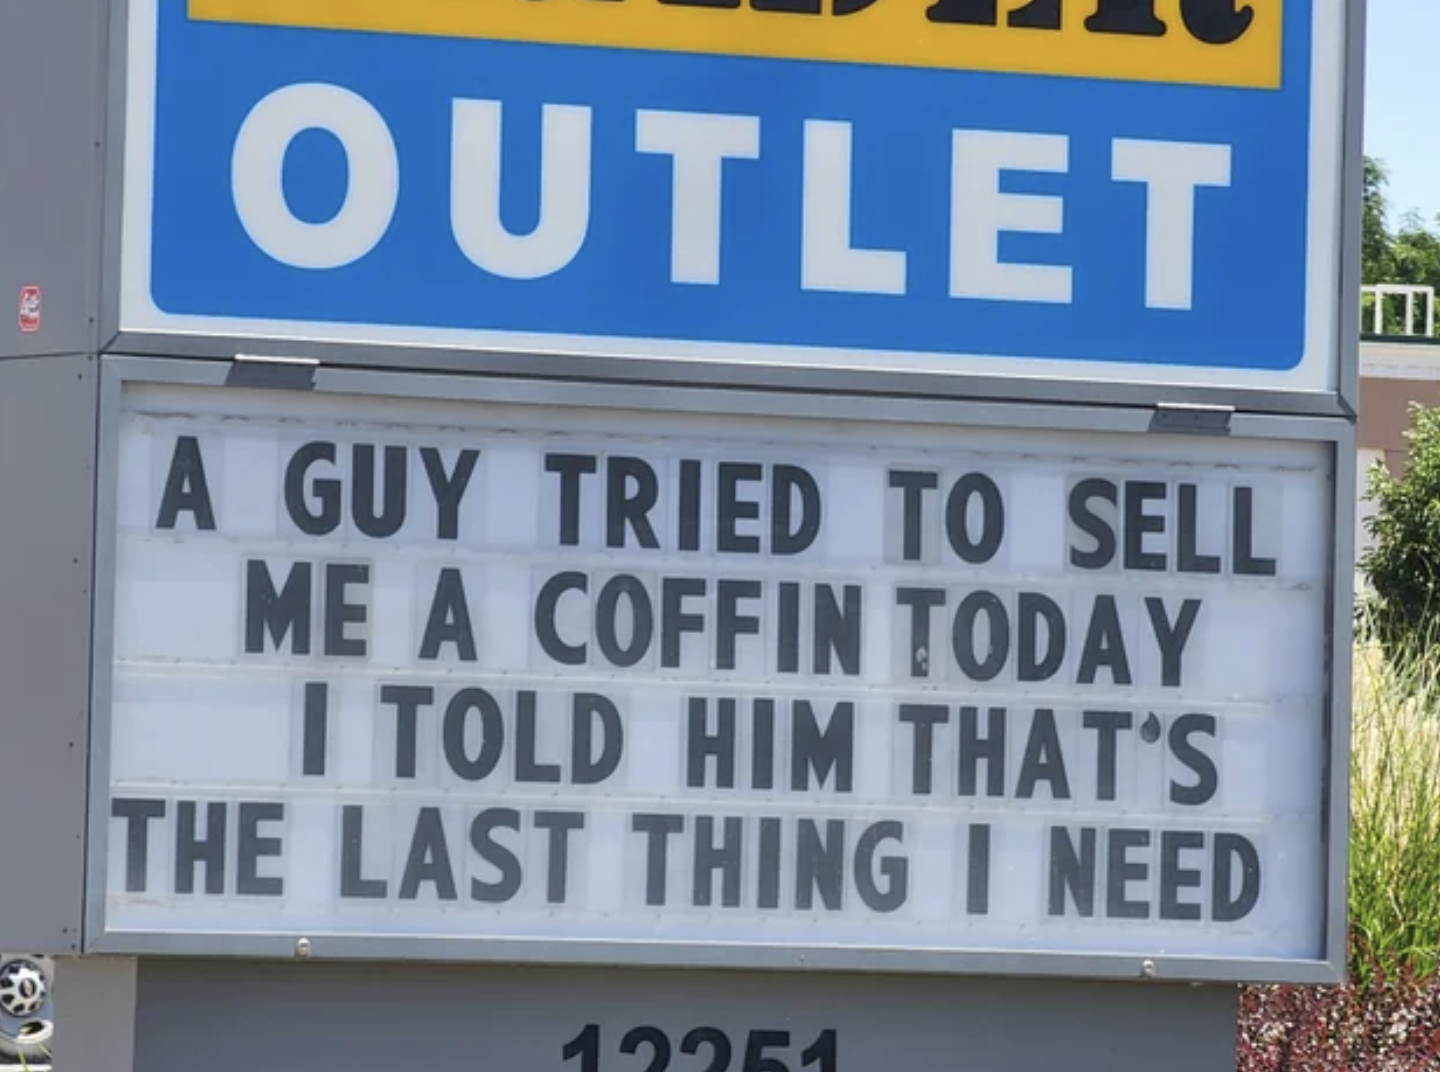 Pics That are Technically Not Wrong - outlet - Outlet A Guy Tried To Sell Me A Coffin Today I Told Him That'S The Last Thing I Need